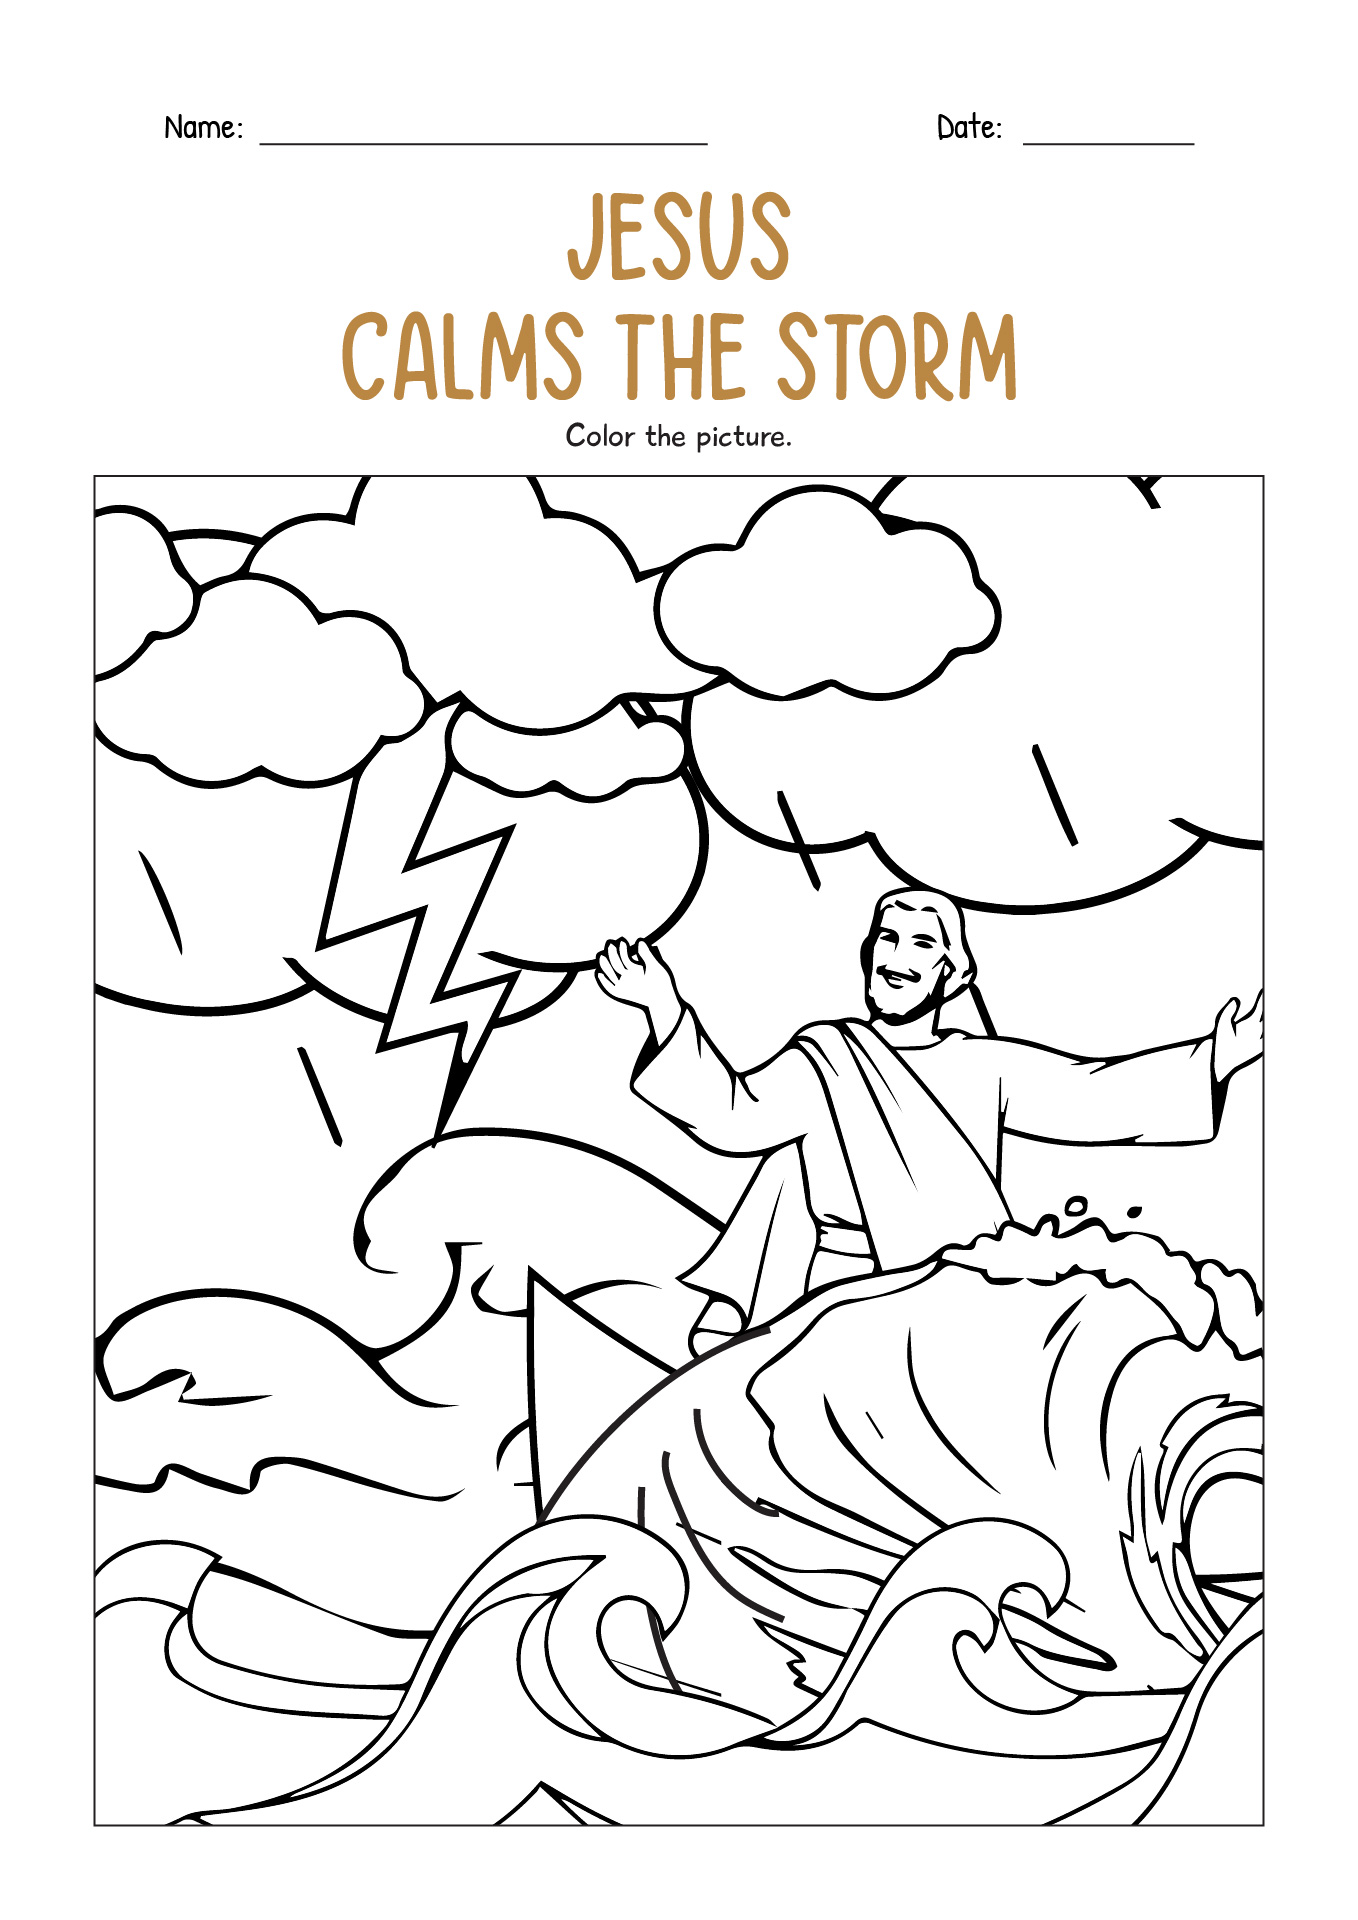 Jesus Calms the Storm Bible Coloring Page